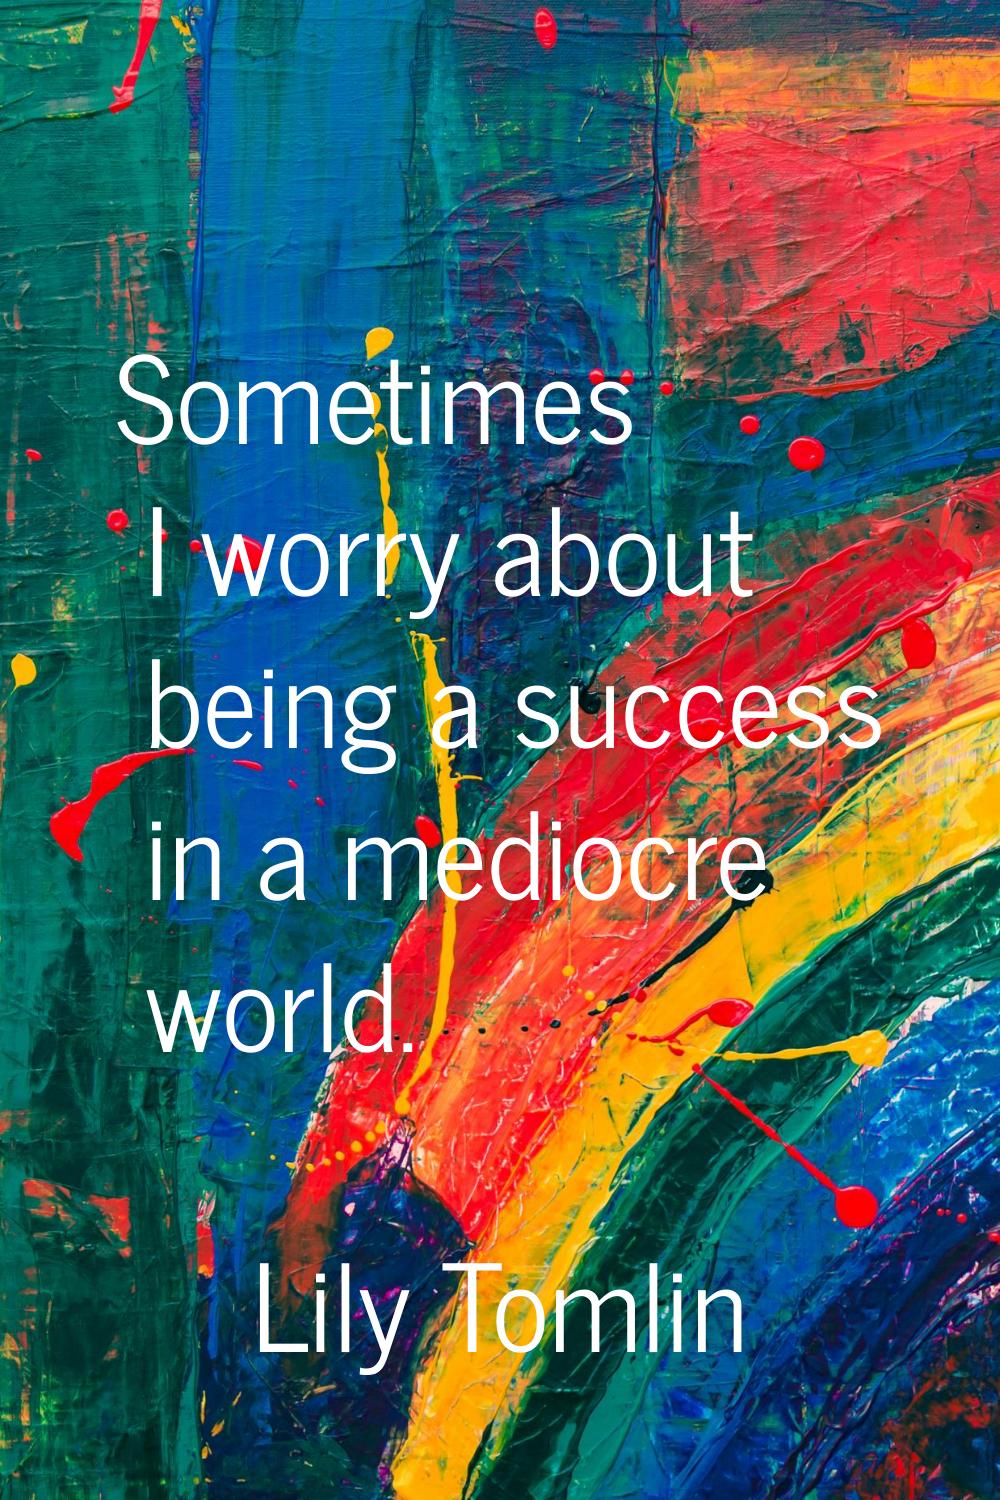 Sometimes I worry about being a success in a mediocre world.